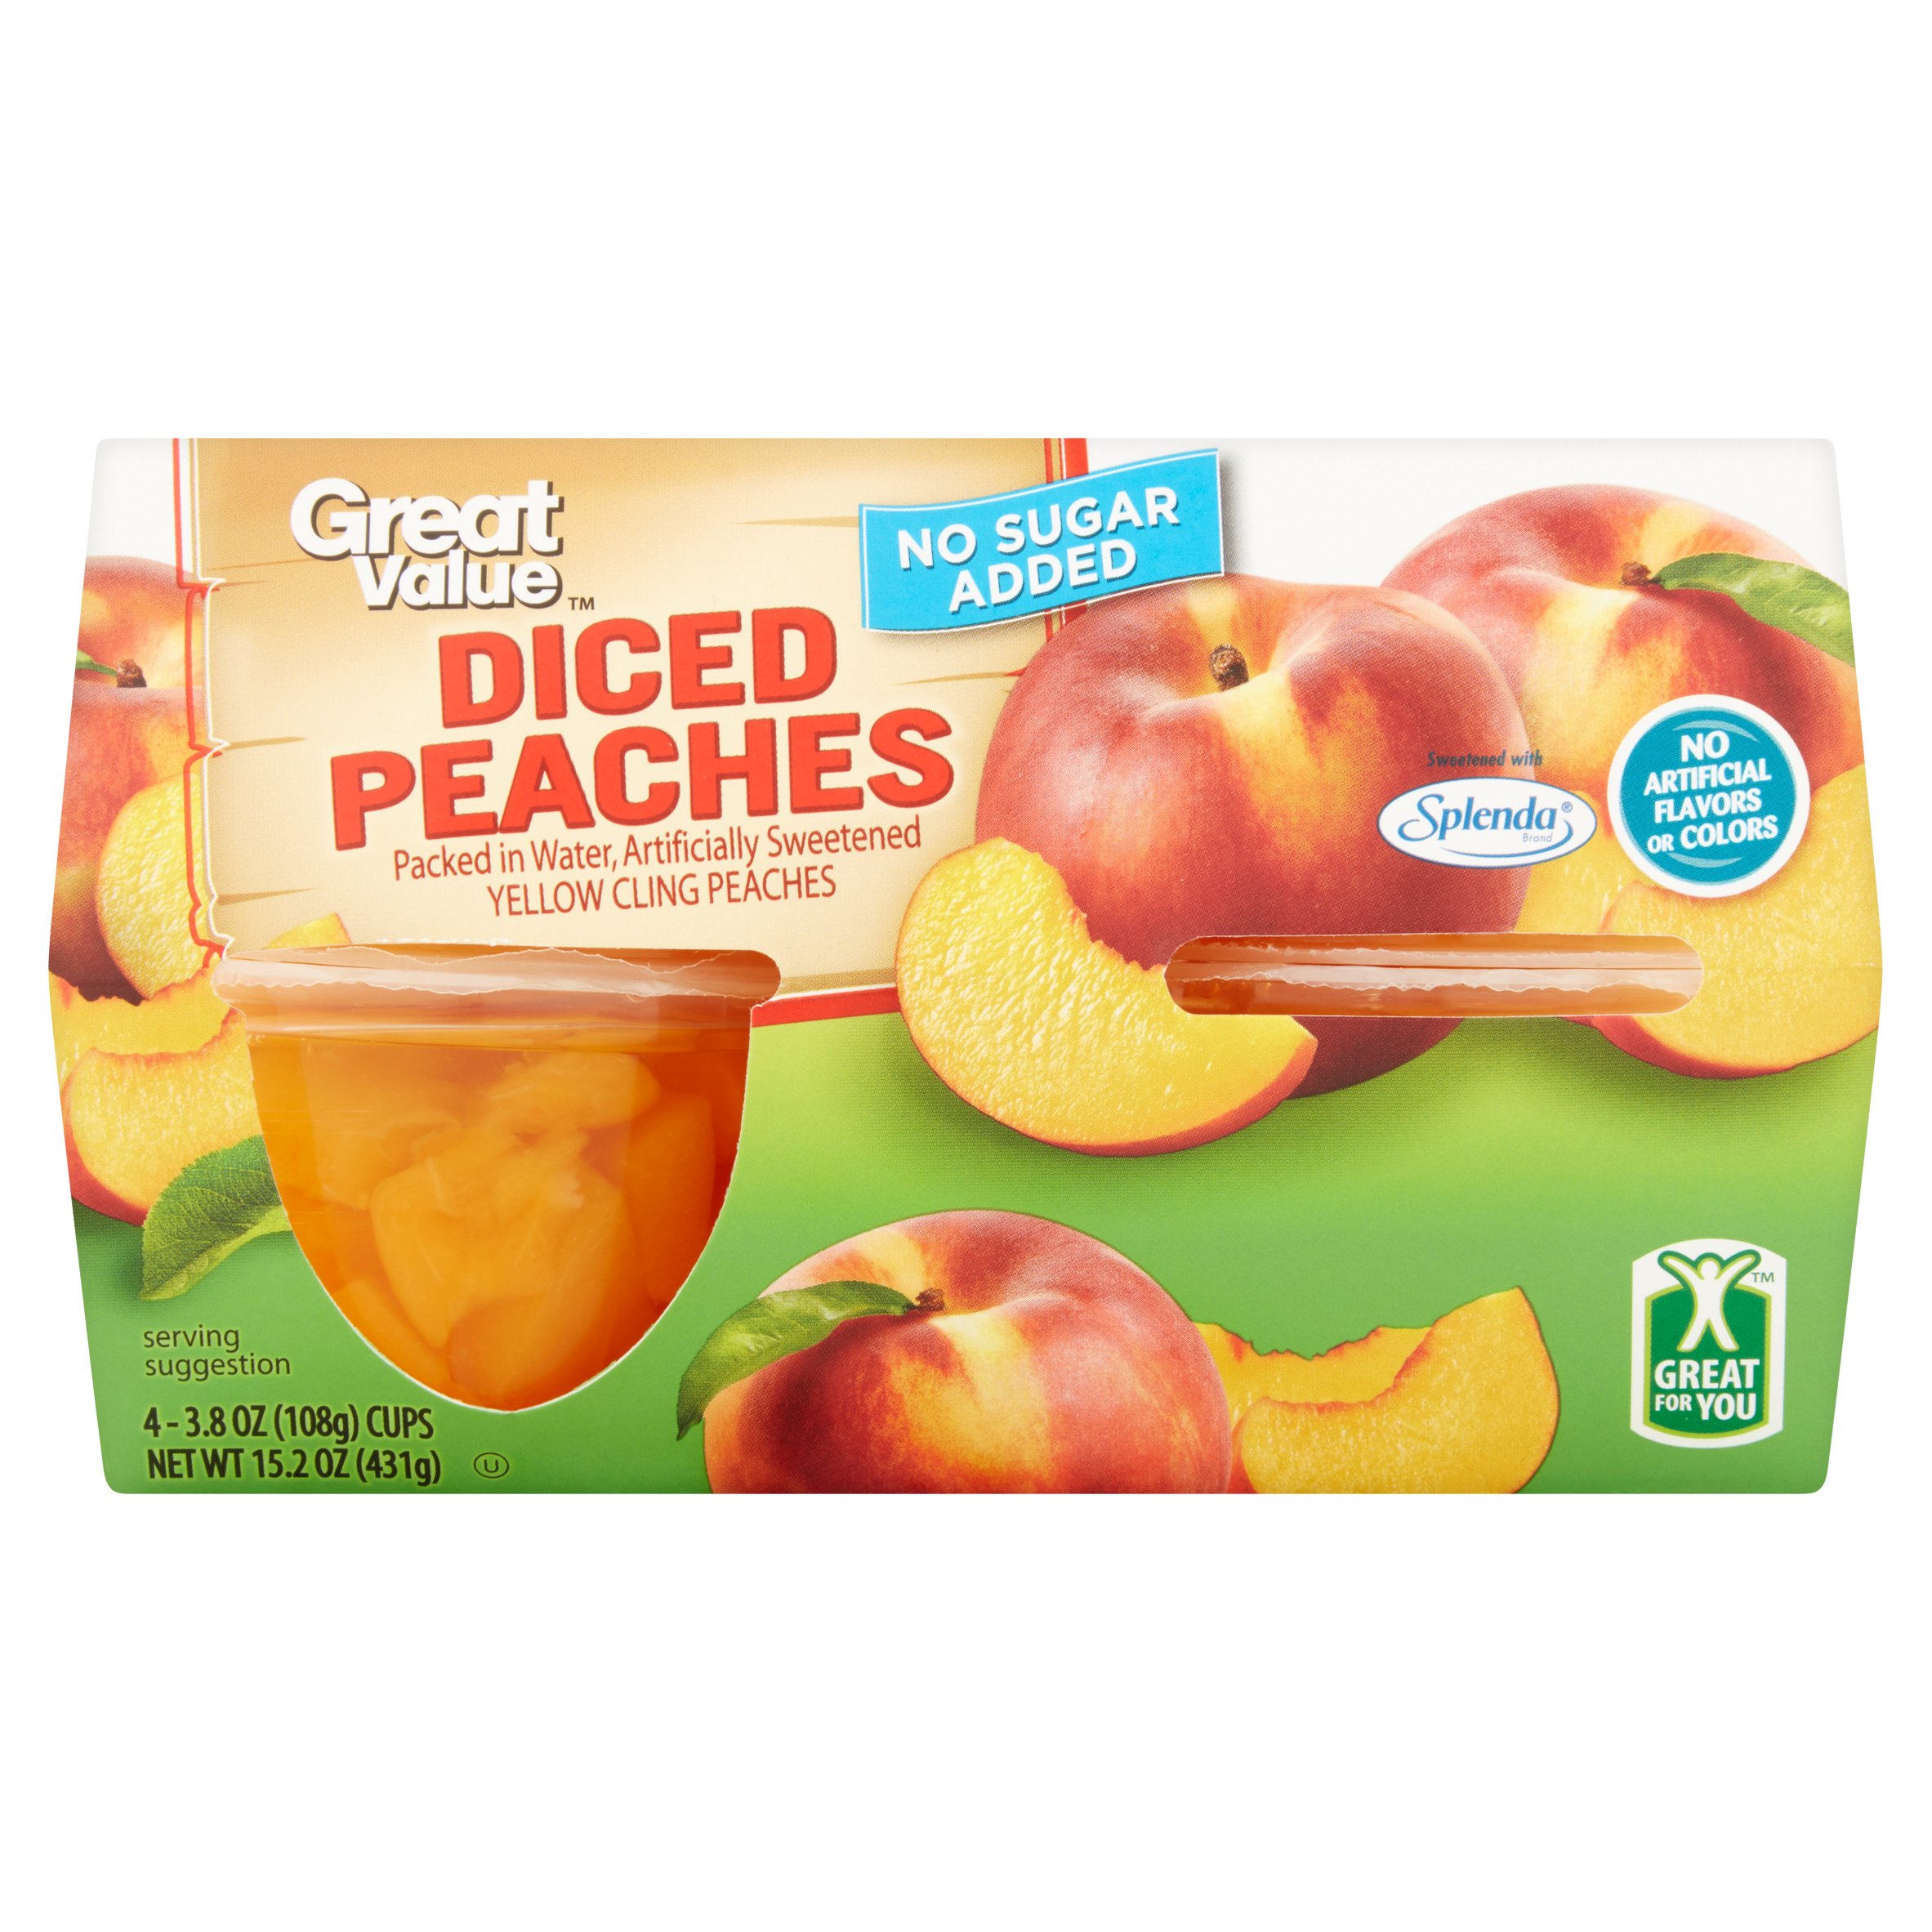 (4 Pack) Great Value Diced Peaches, No Sugar Added, 3.8 Oz, 4 Count